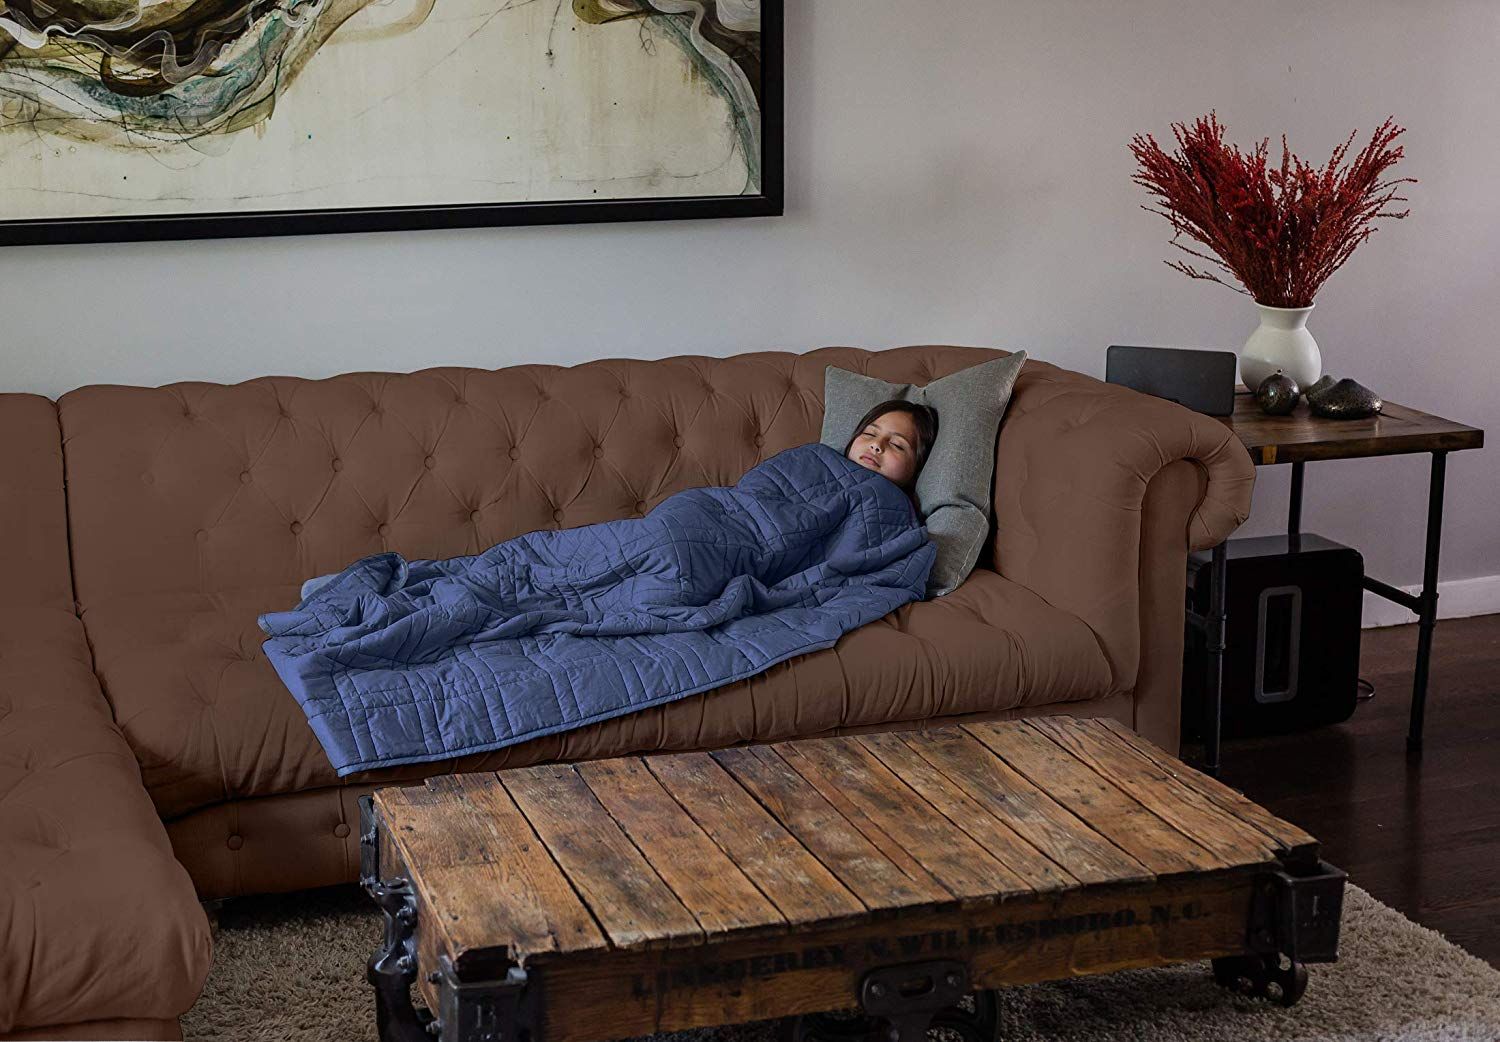 Weighted Blankets Are The Sleep Solution You've Been Looking For